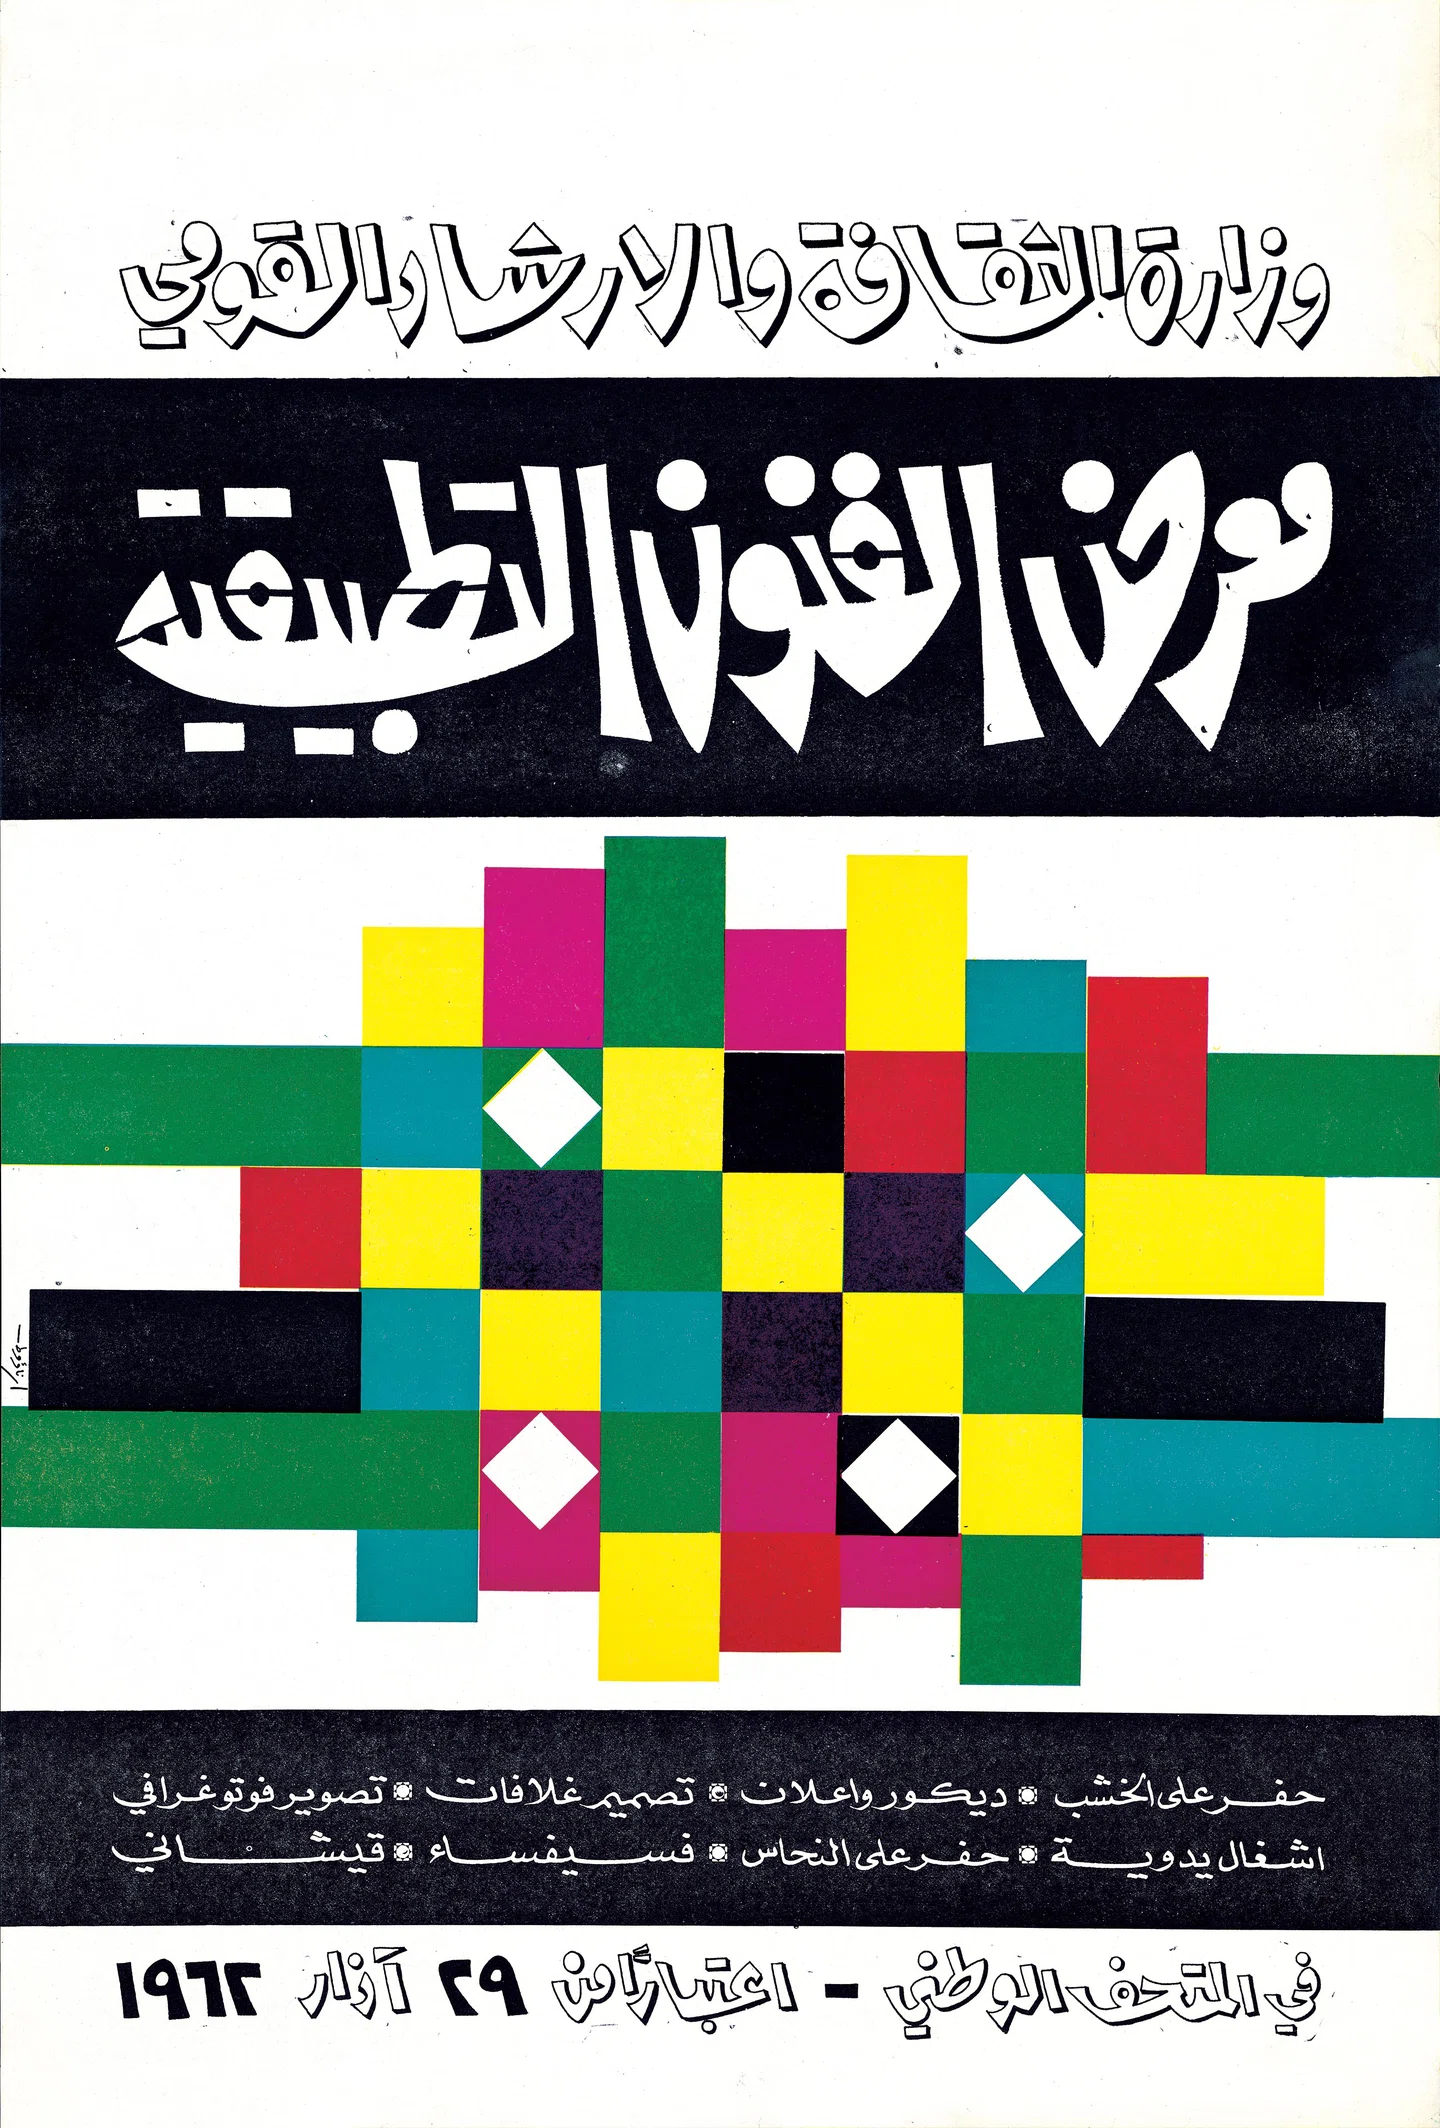 syrian-print-archive-features-graphic-design-itsnicethat-5.jpg